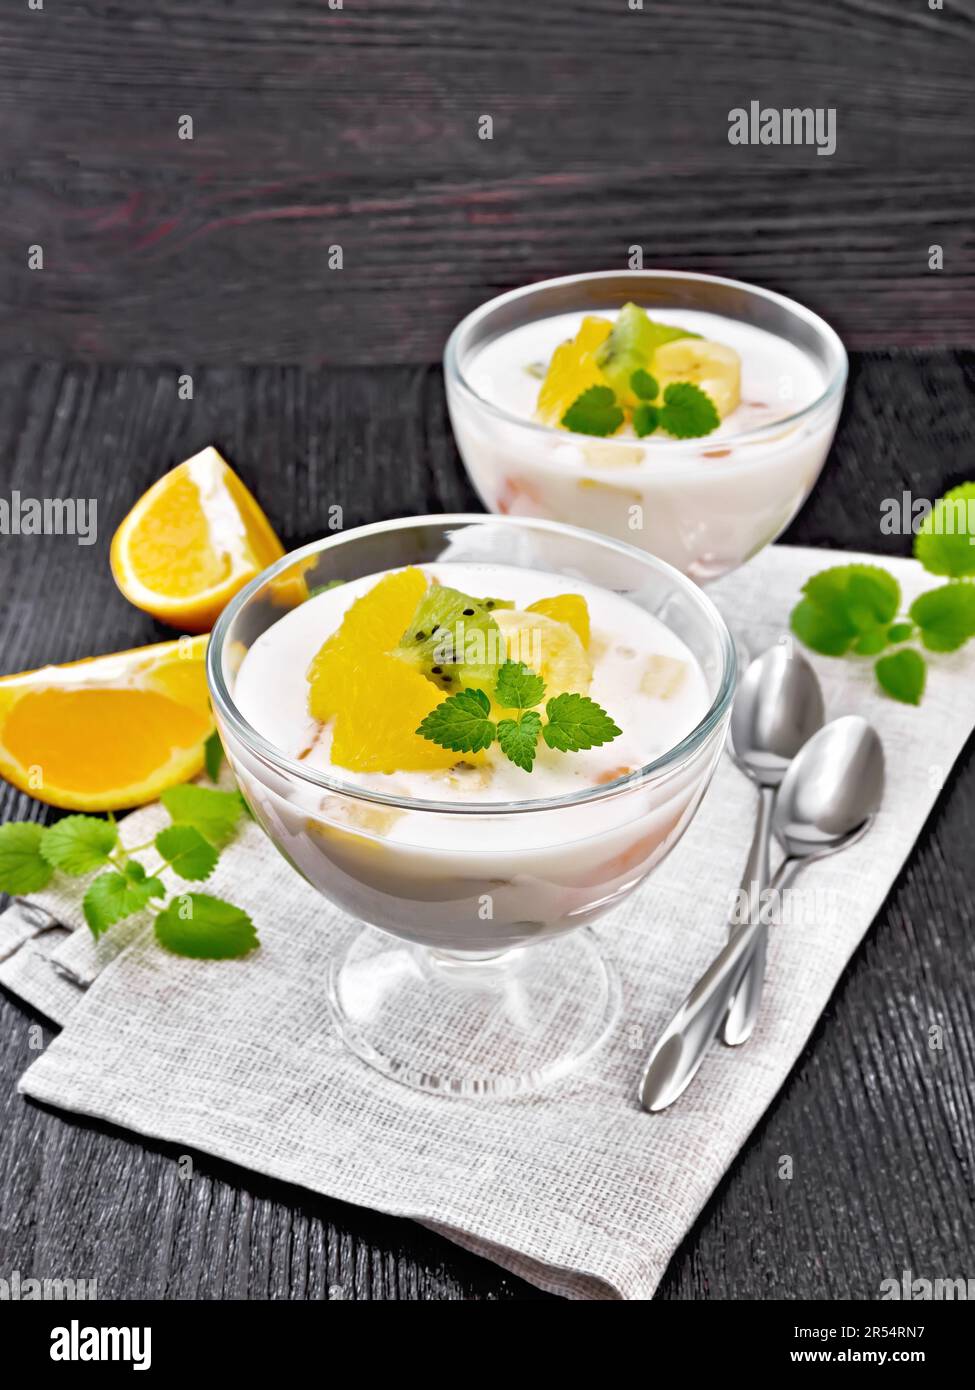 Dessert airy yogurt with orange, banana and kiwi in two glass bowls, fruits, spoons and mint on a napkin against dark wooden board Stock Photo